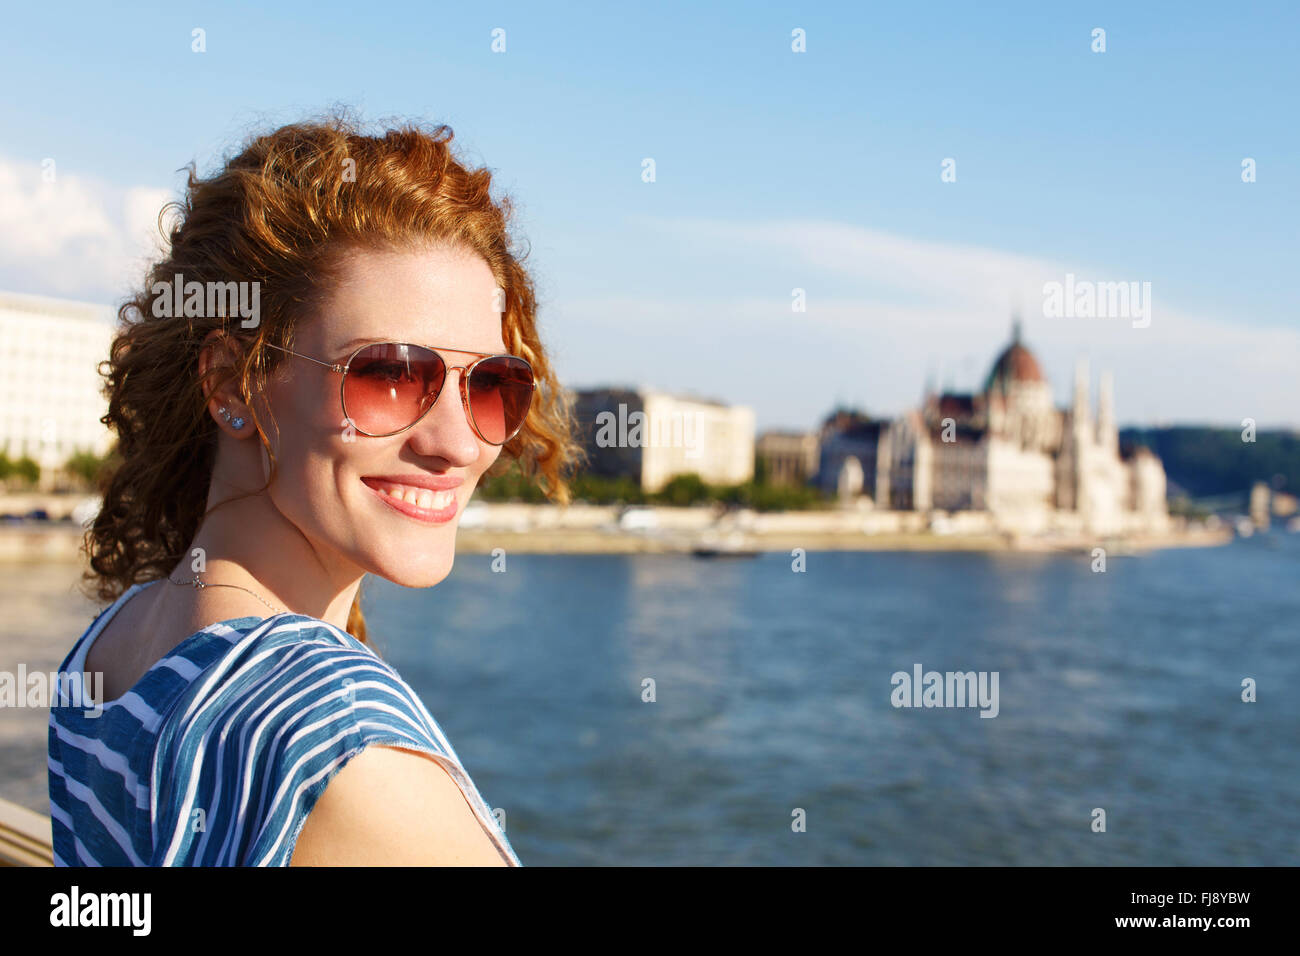 Woman tourist in sunglasses in Budapest, Hungary. Parliament and river Danube background. Stock Photo